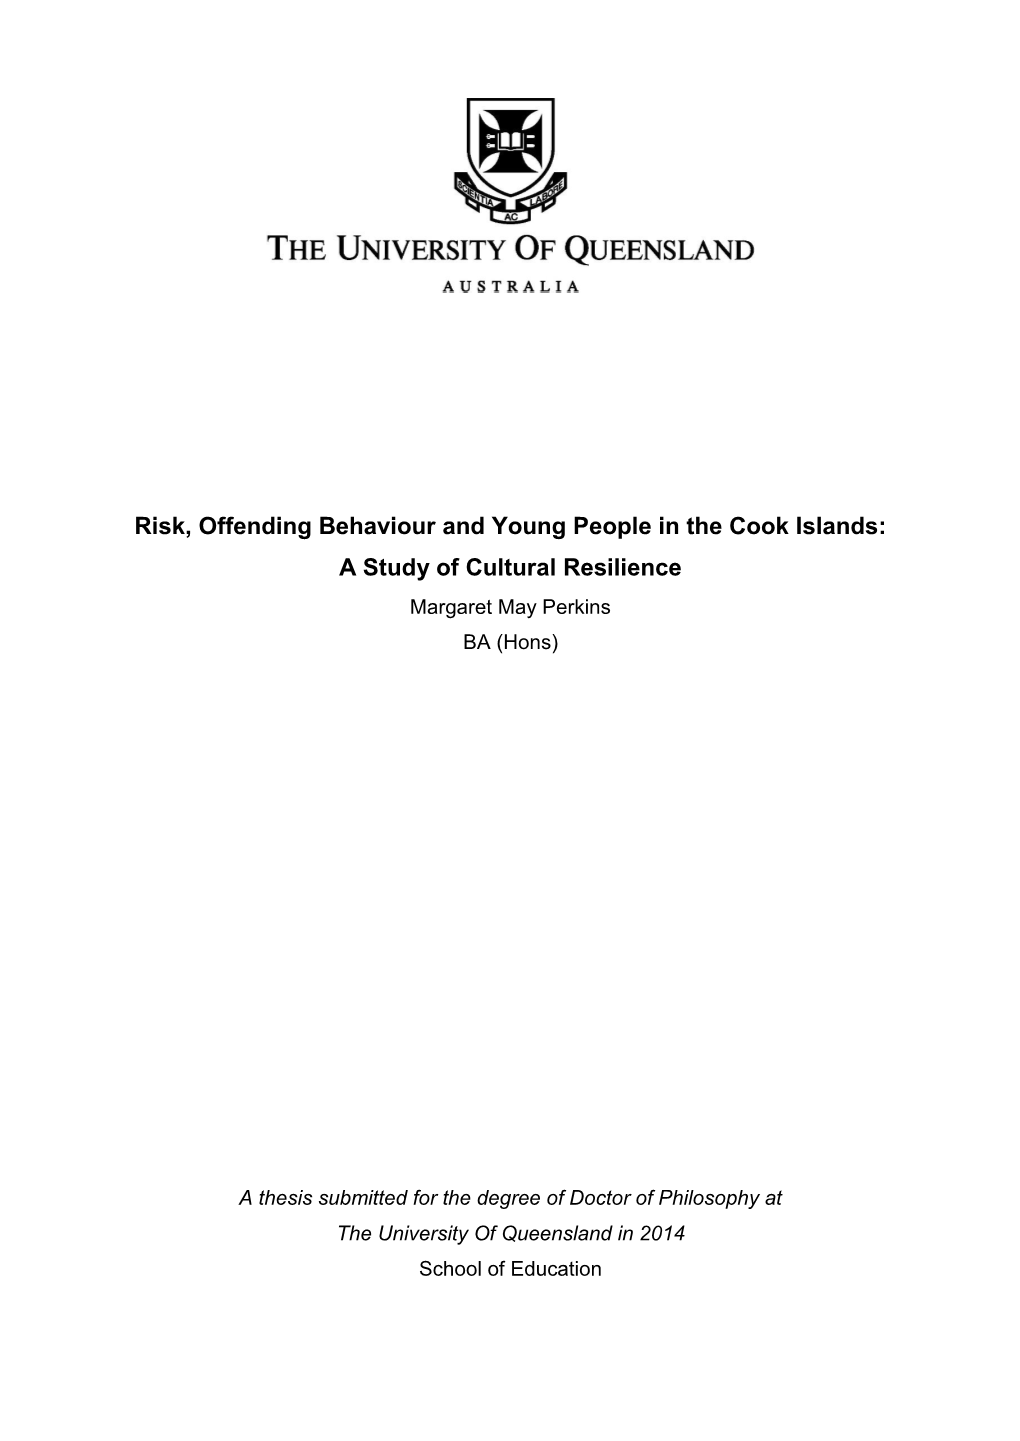 Risk, Offending Behaviour and Young People in the Cook Islands: a Study of Cultural Resilience Margaret May Perkins BA (Hons)